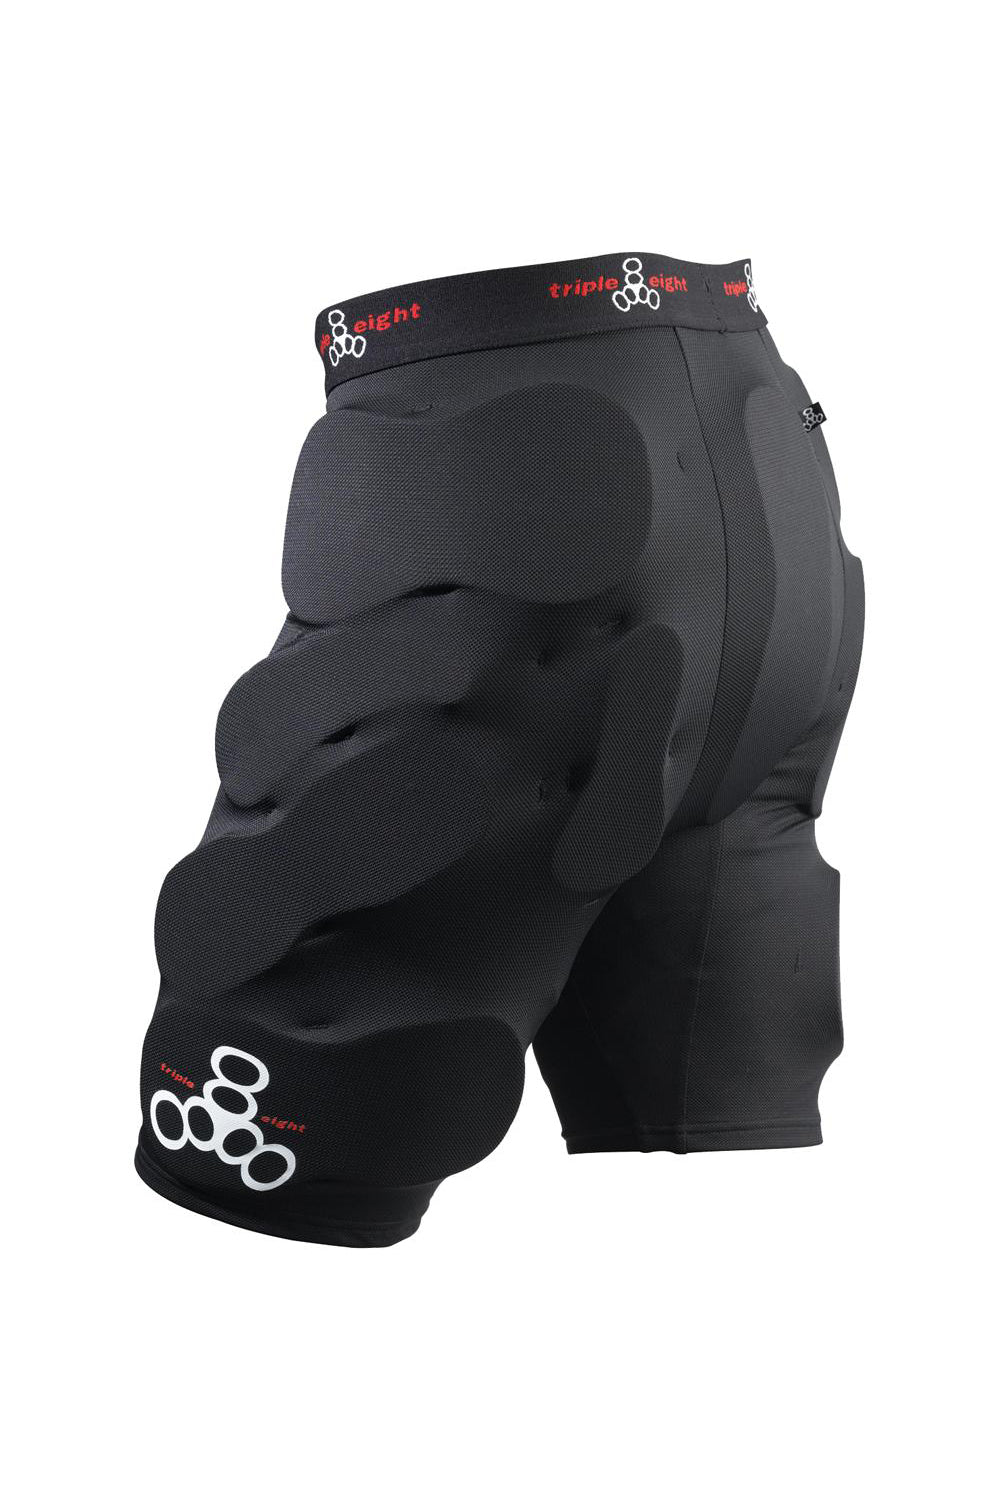 Triple Eight Bumsaver pads